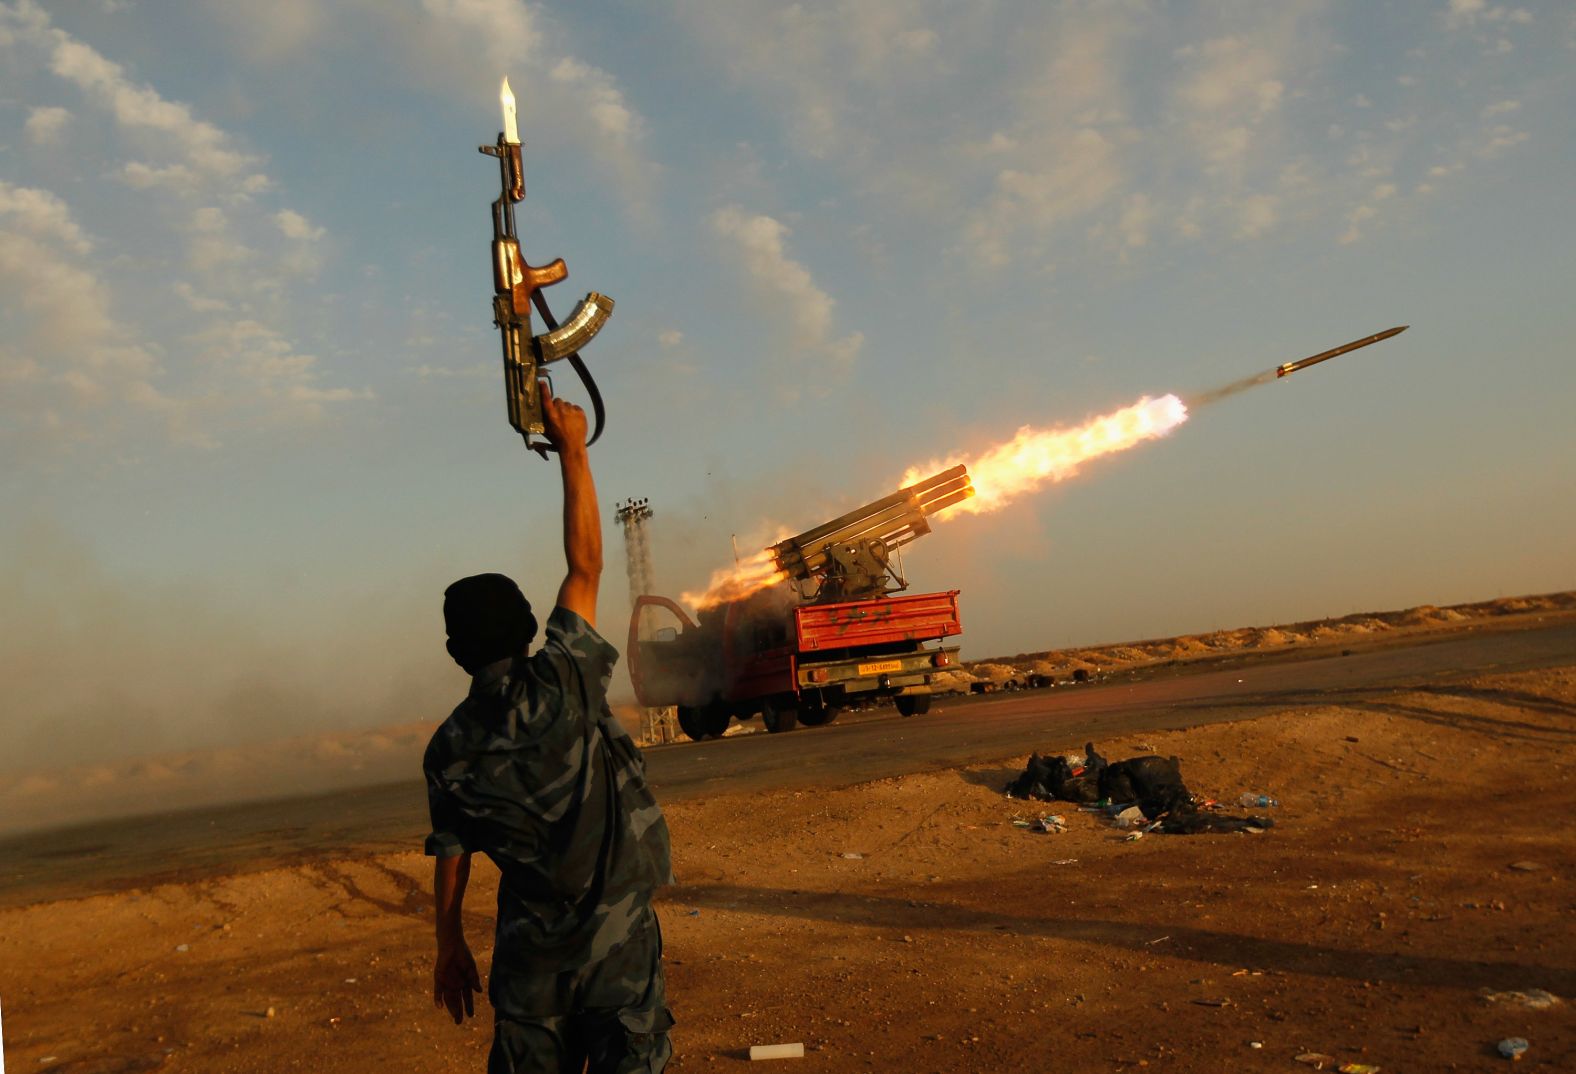 A rebel celebrates as his comrades fire rockets at troops loyal to Libyan leader Moammar Gadhafi in April 2011. <a href="https://www.cnn.com/2013/09/26/world/africa/moammar-gadhafi-fast-facts/index.html" target="_blank">Gadhafi was killed in October 2011</a> after being captured by rebel forces. He had been in power since 1969.